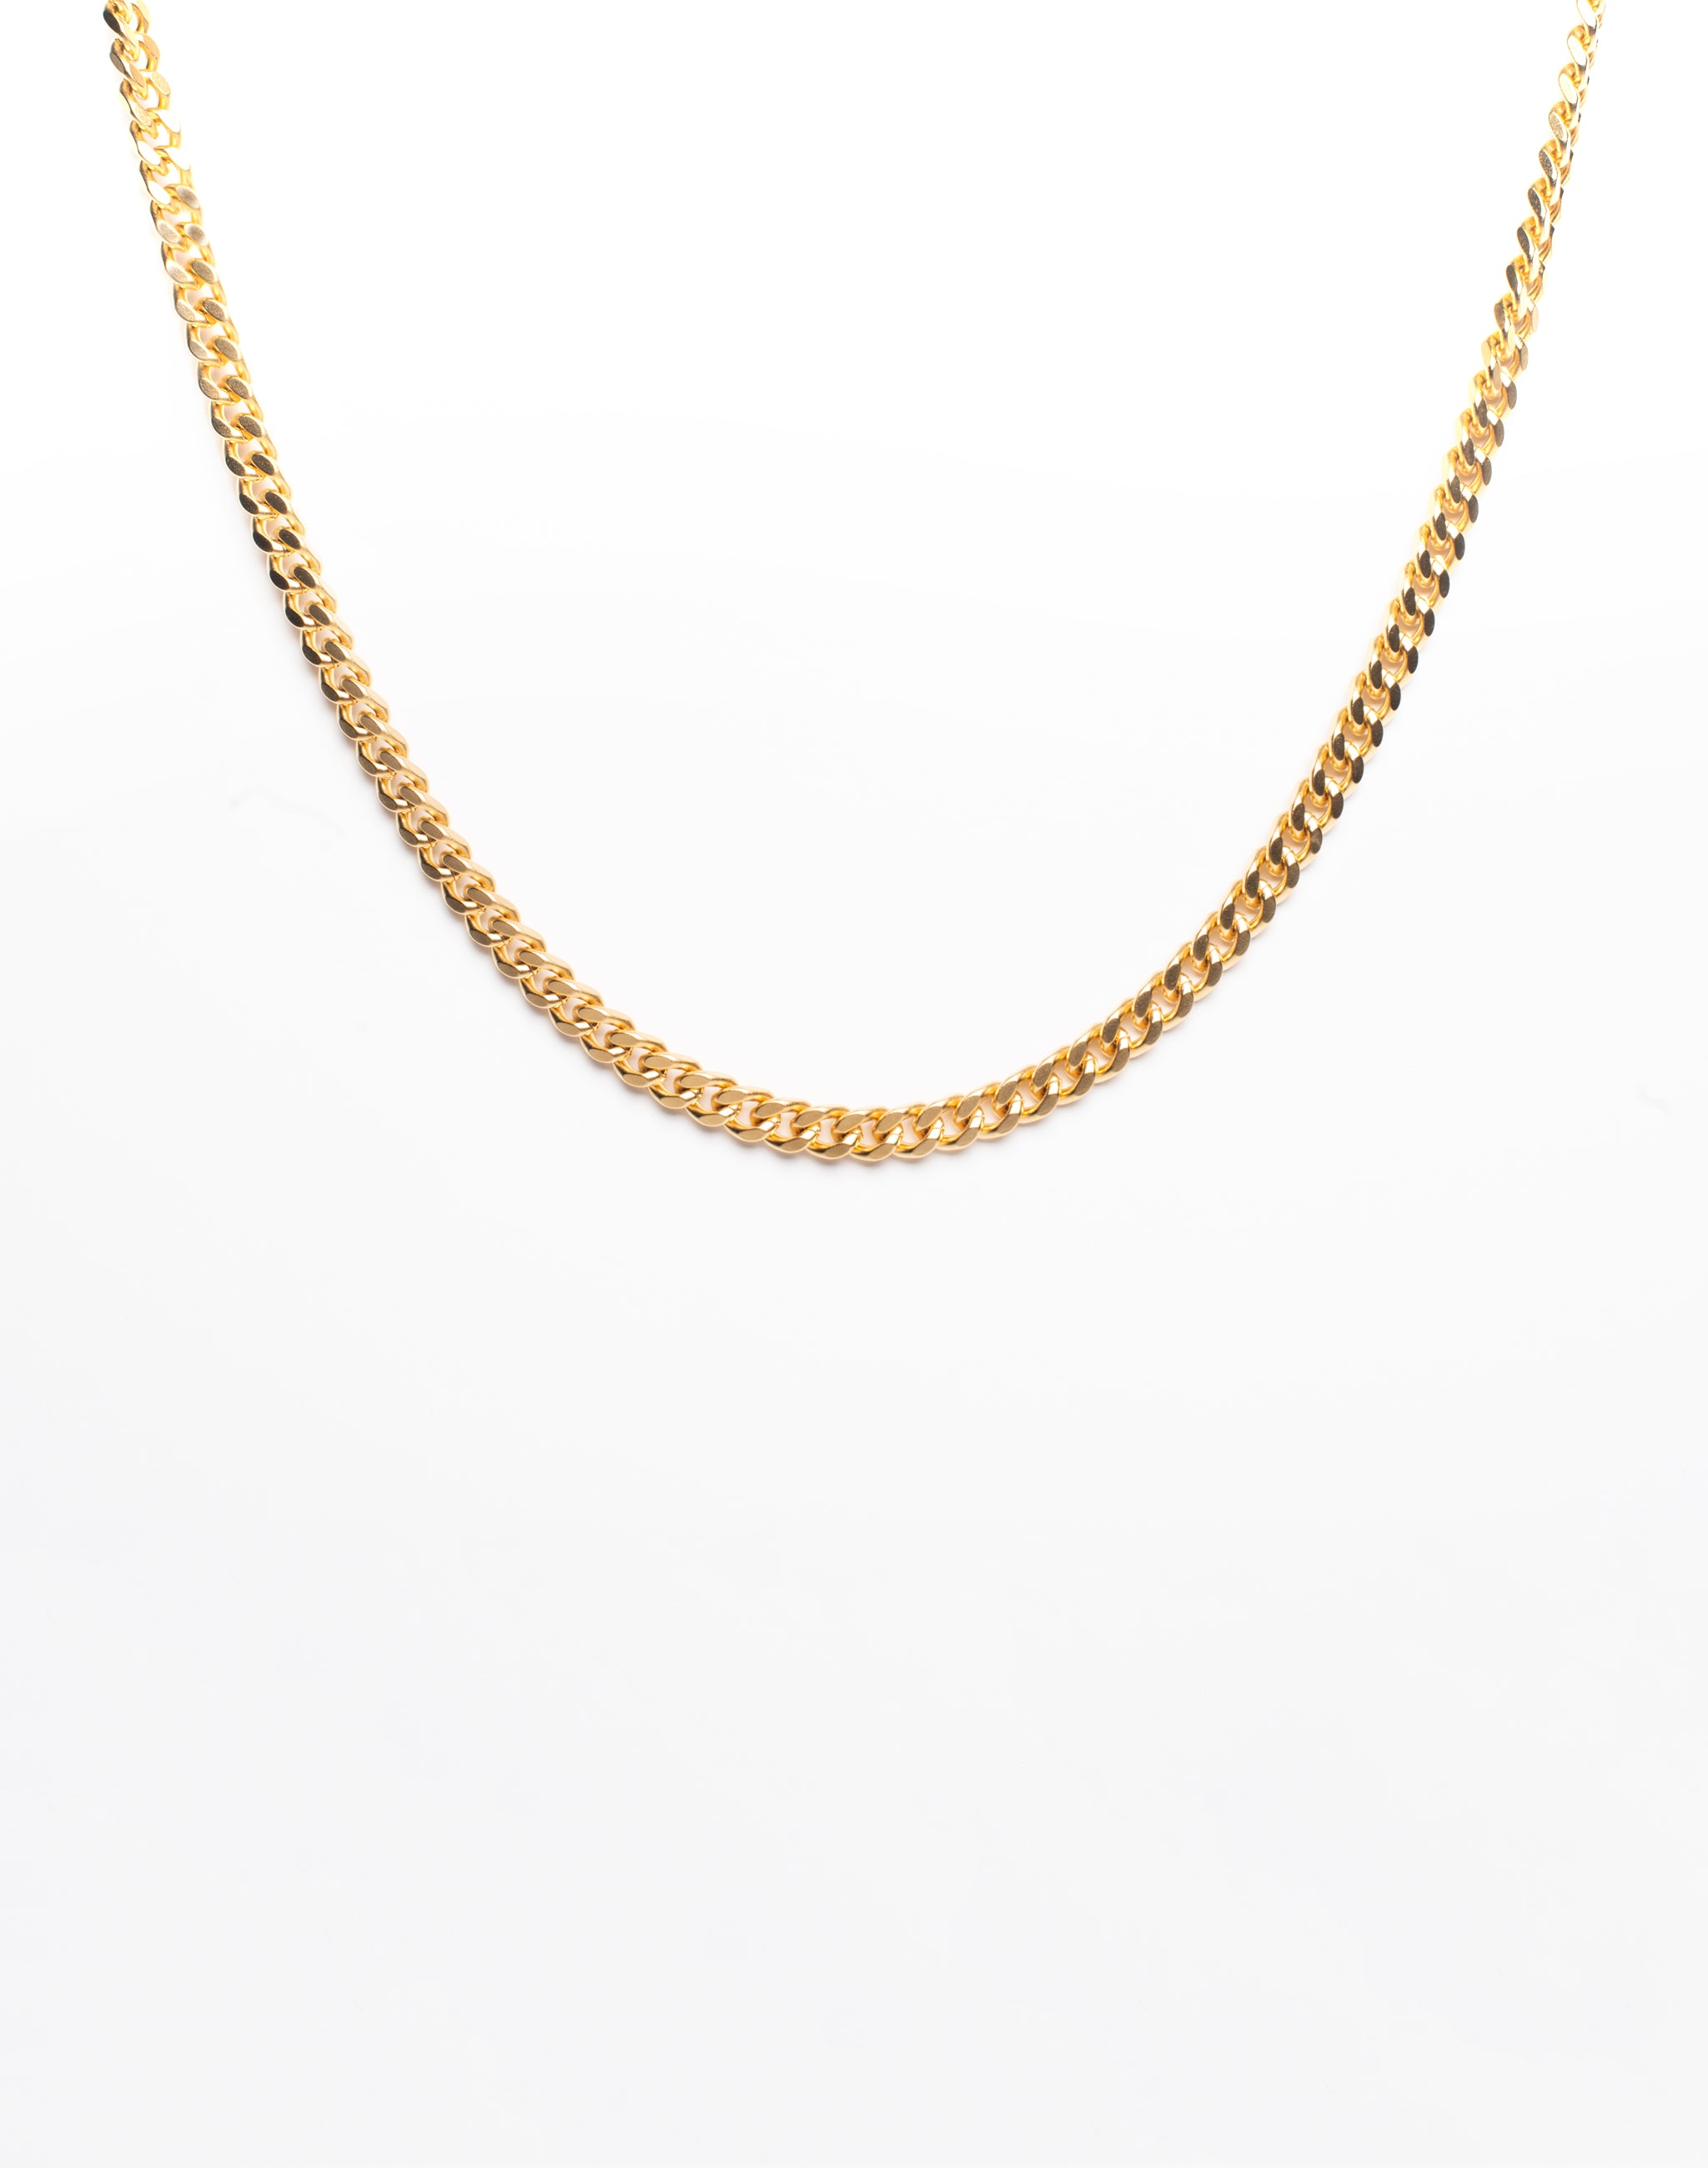 thin gold   CURB CHAIN   necklace